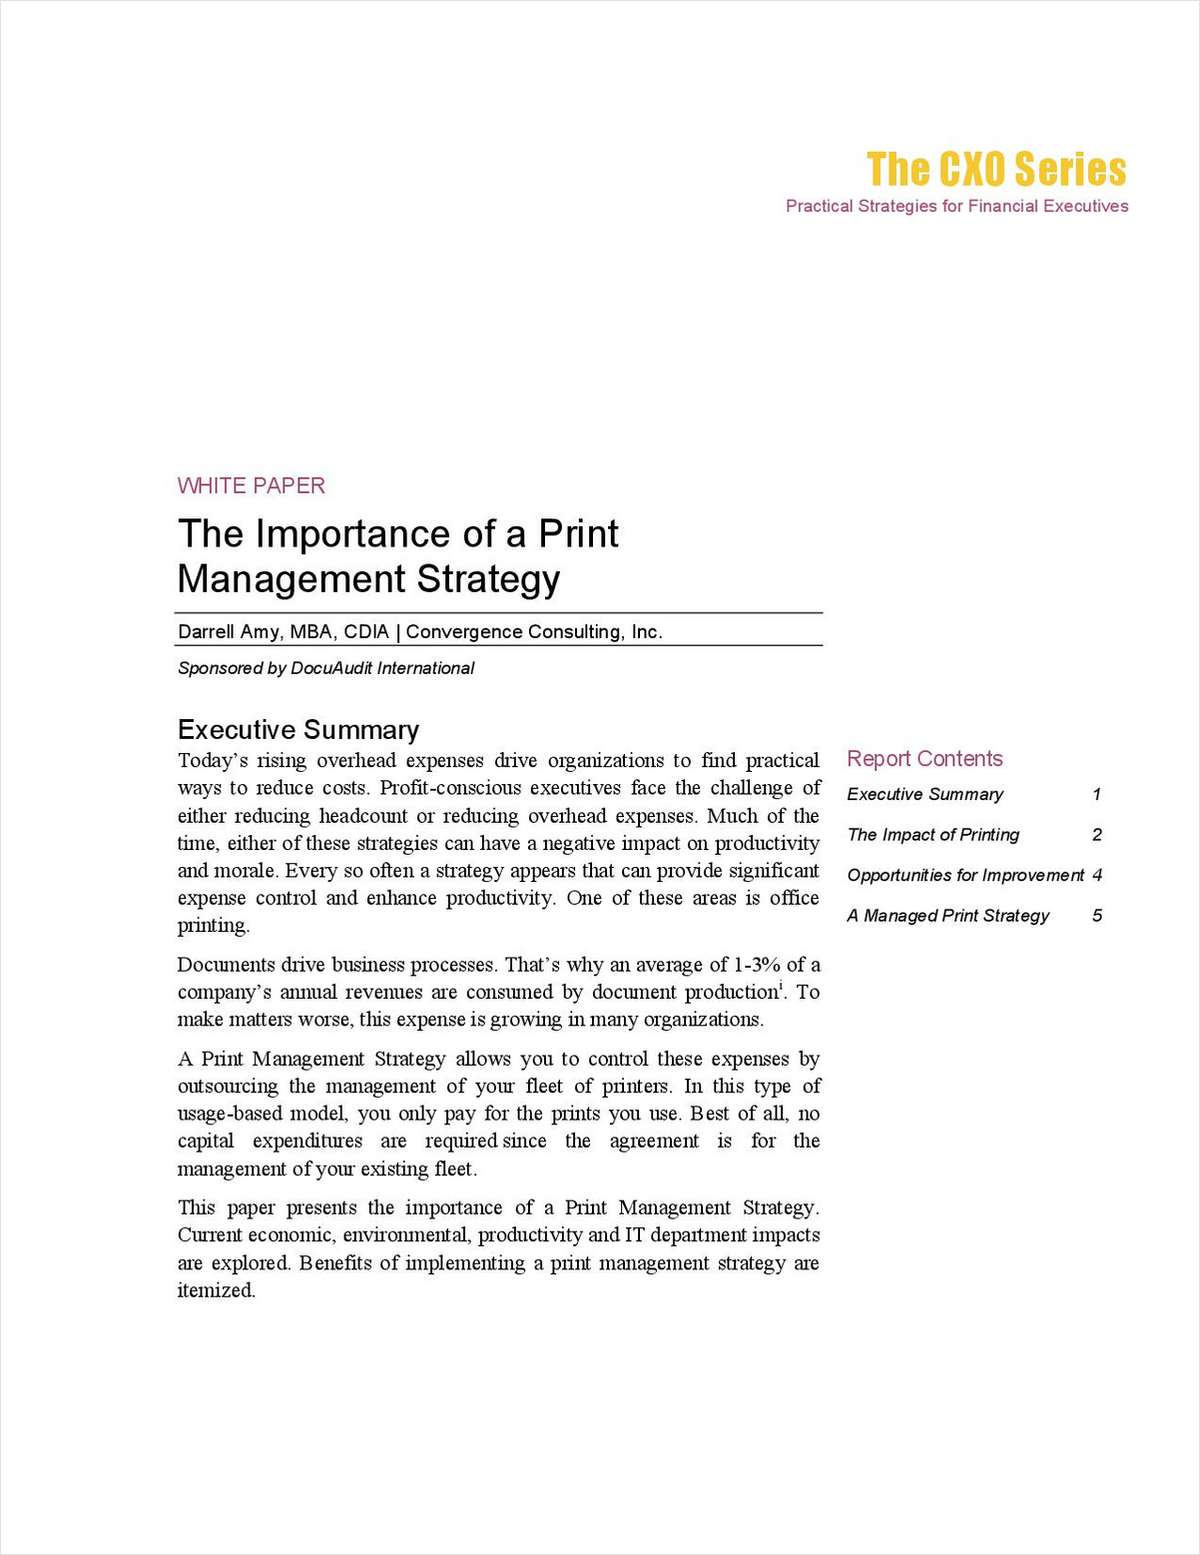 The Importance of a Print Management Strategy – And Why it Matters